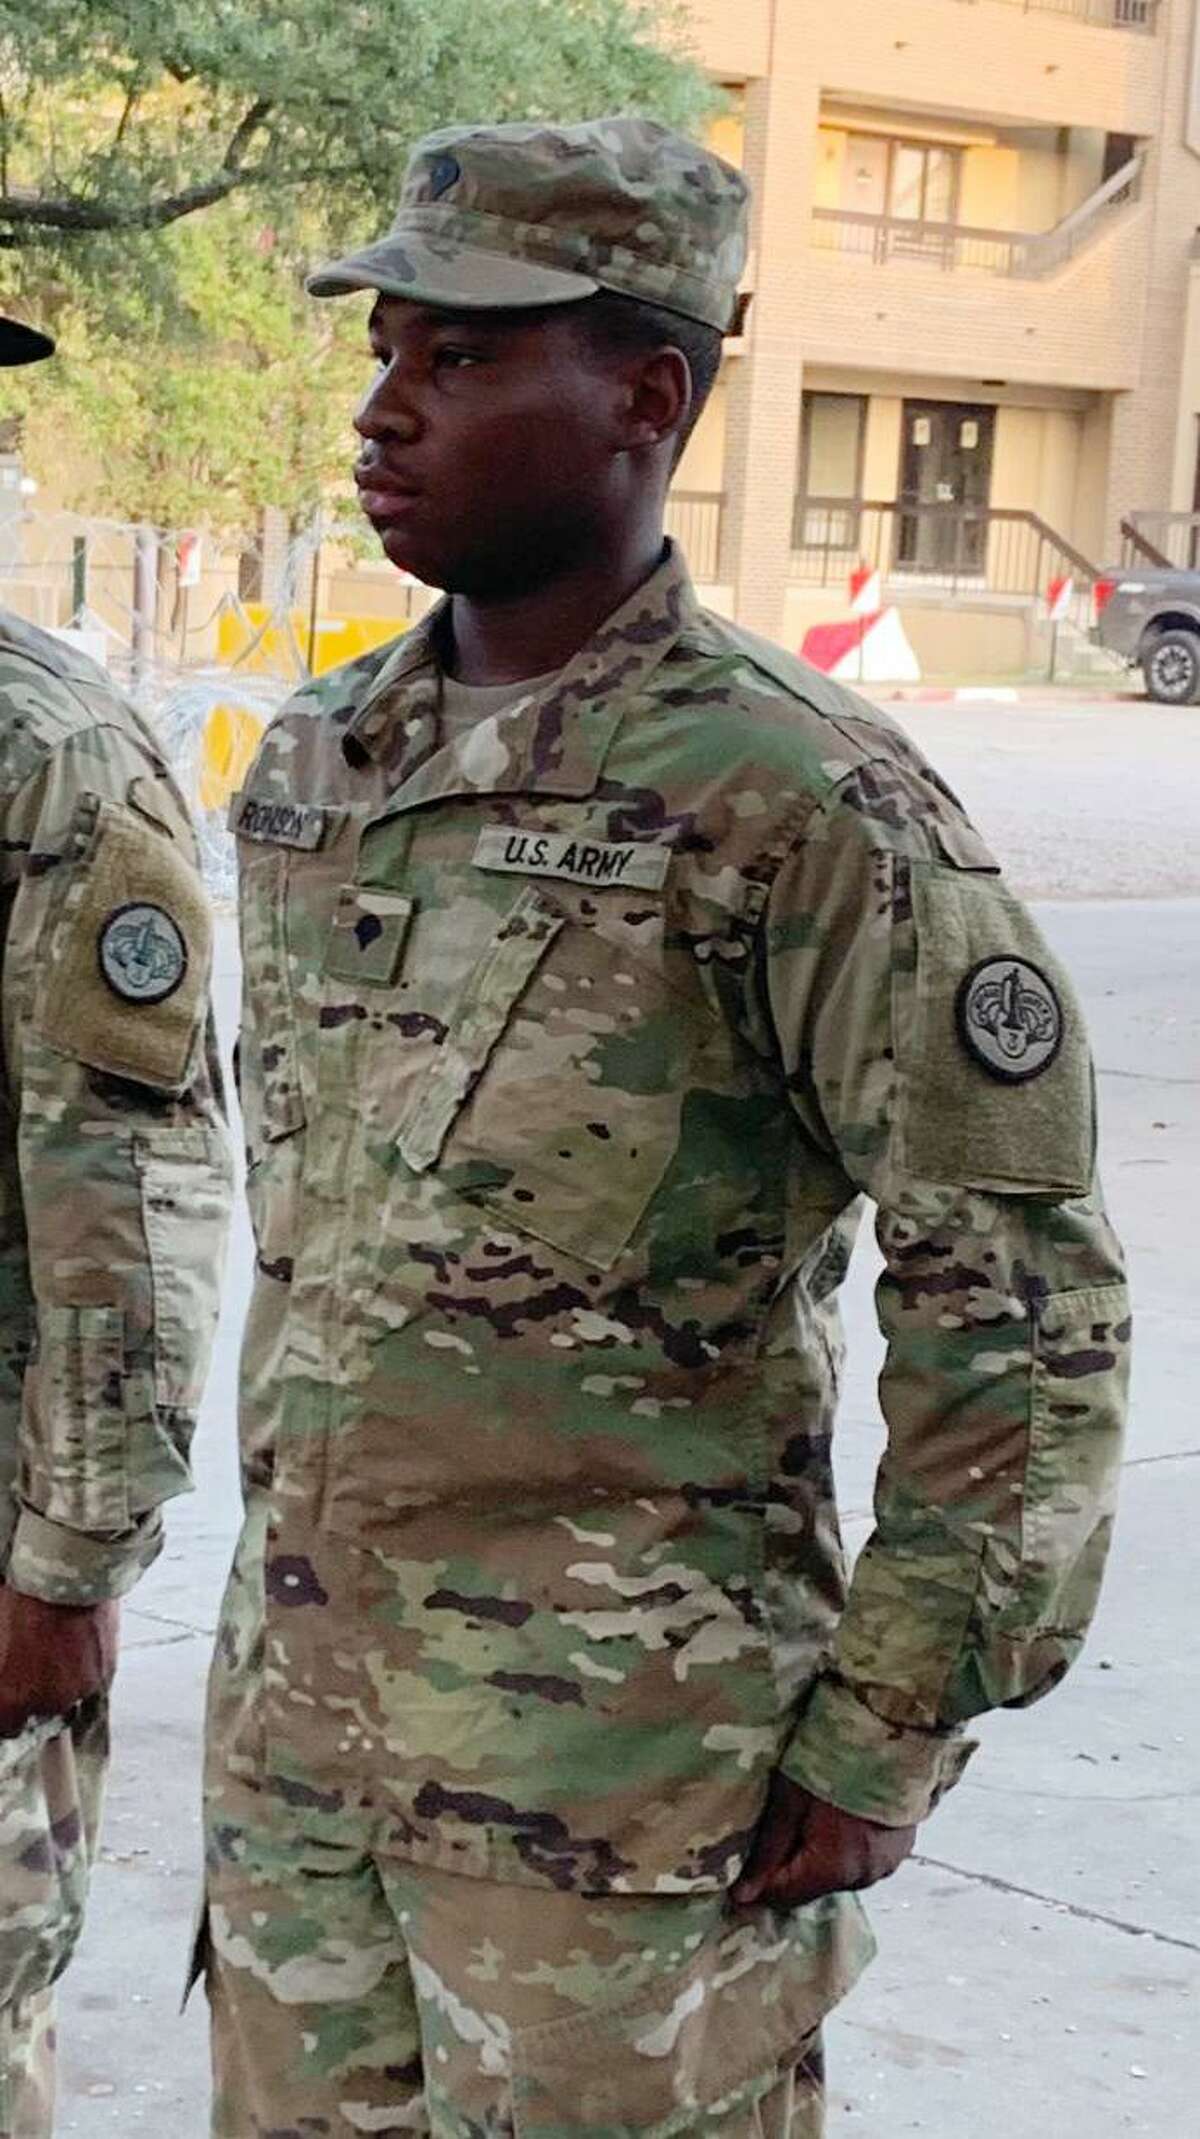 Aaron David Robinson, the suspect in the disappearance of Fort Hood soldier Vanessa Guillén, died by a self-inflicted gunshot wound on July 1, 2020.